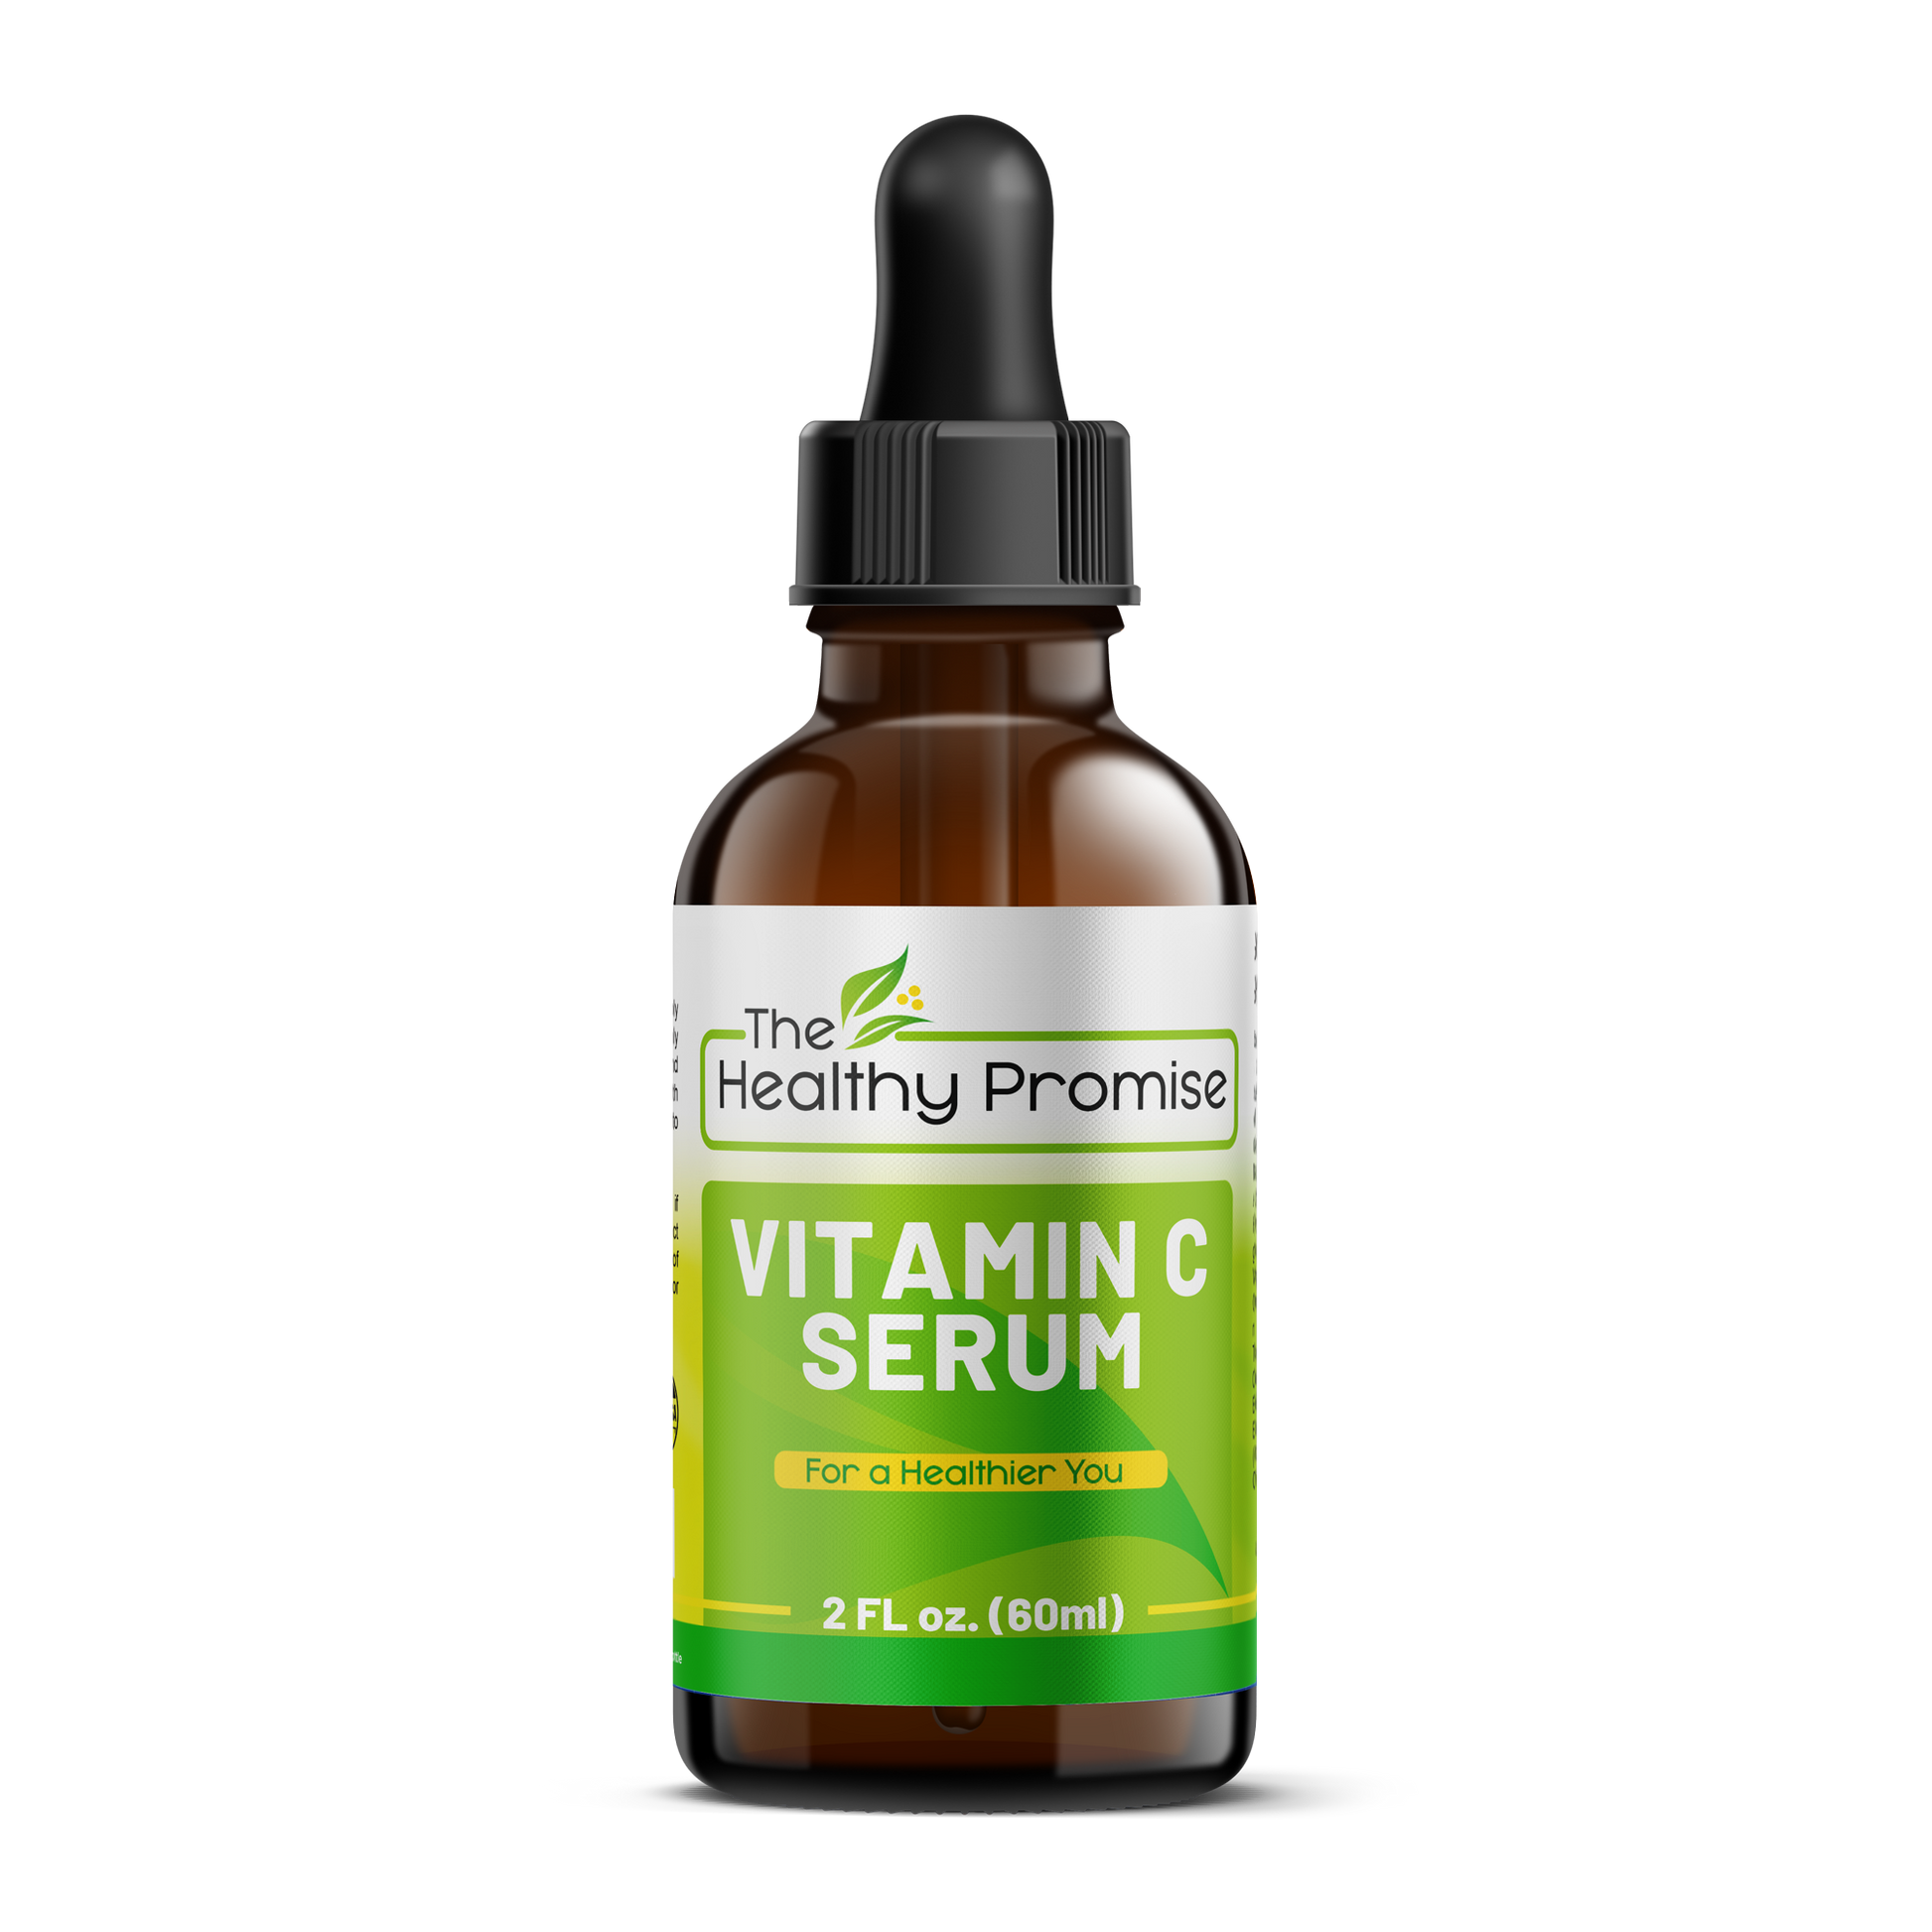 the healthy promise vitamin c serum dietary supplement bottle front view